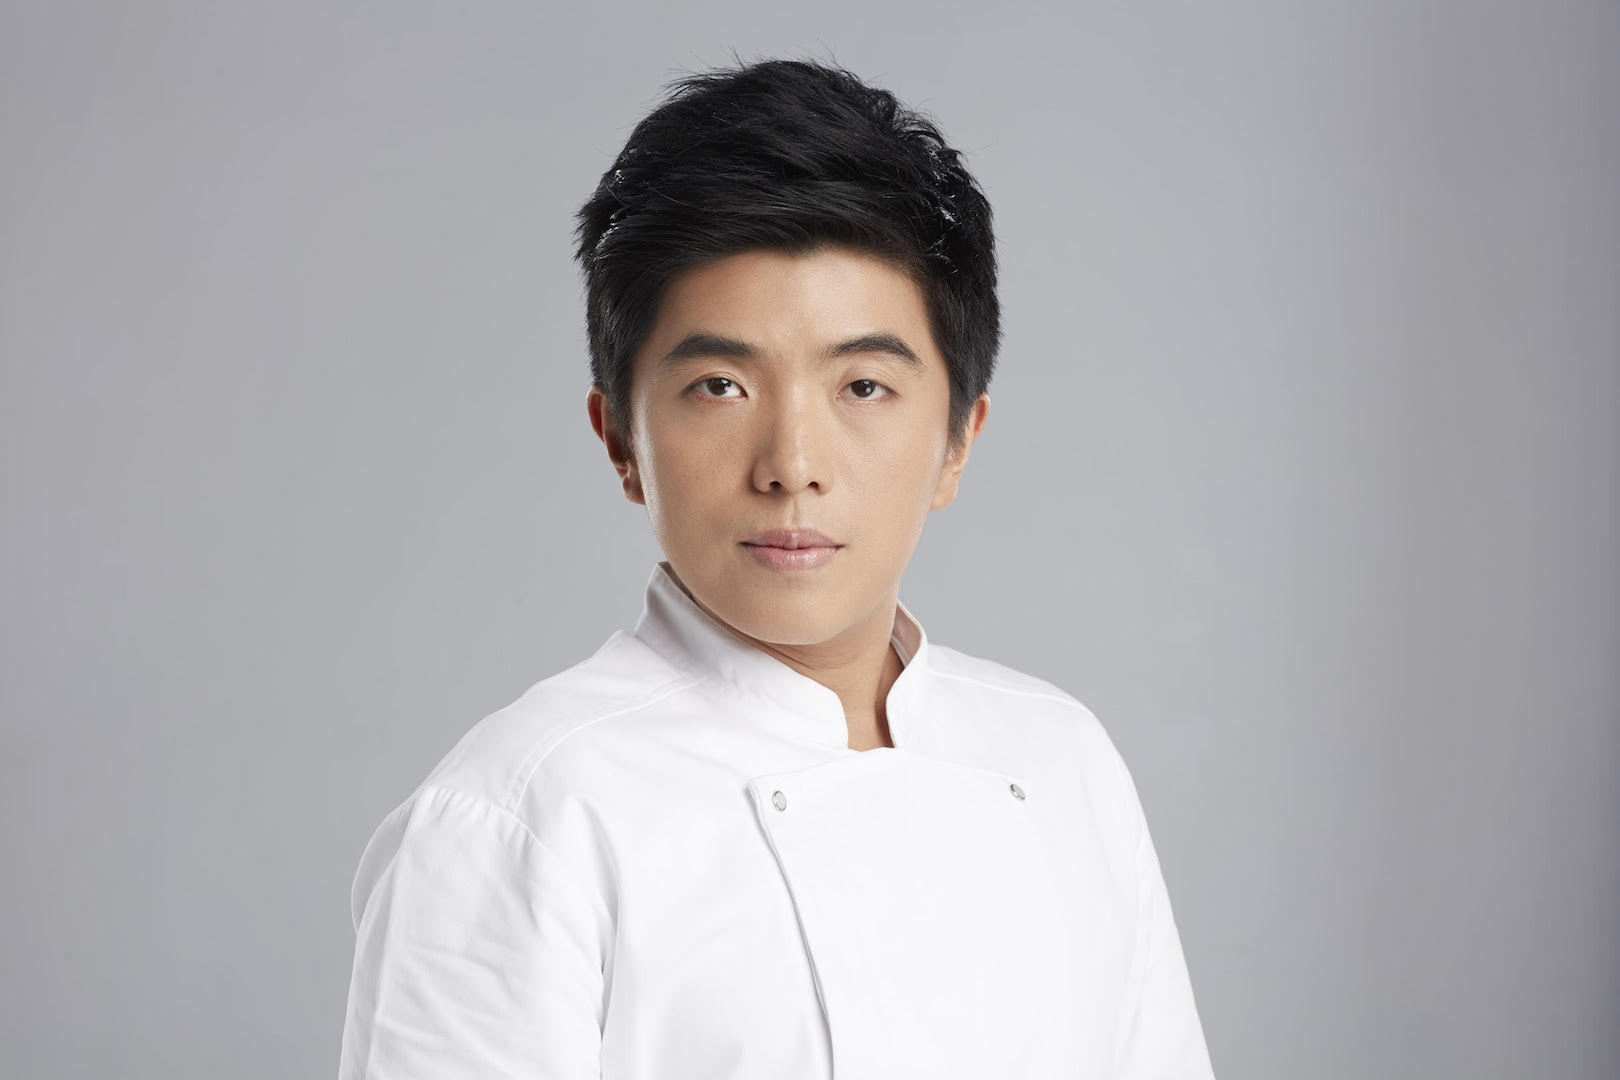 Read A Successful Young Thai Chef’s Take On Restaurant Awards